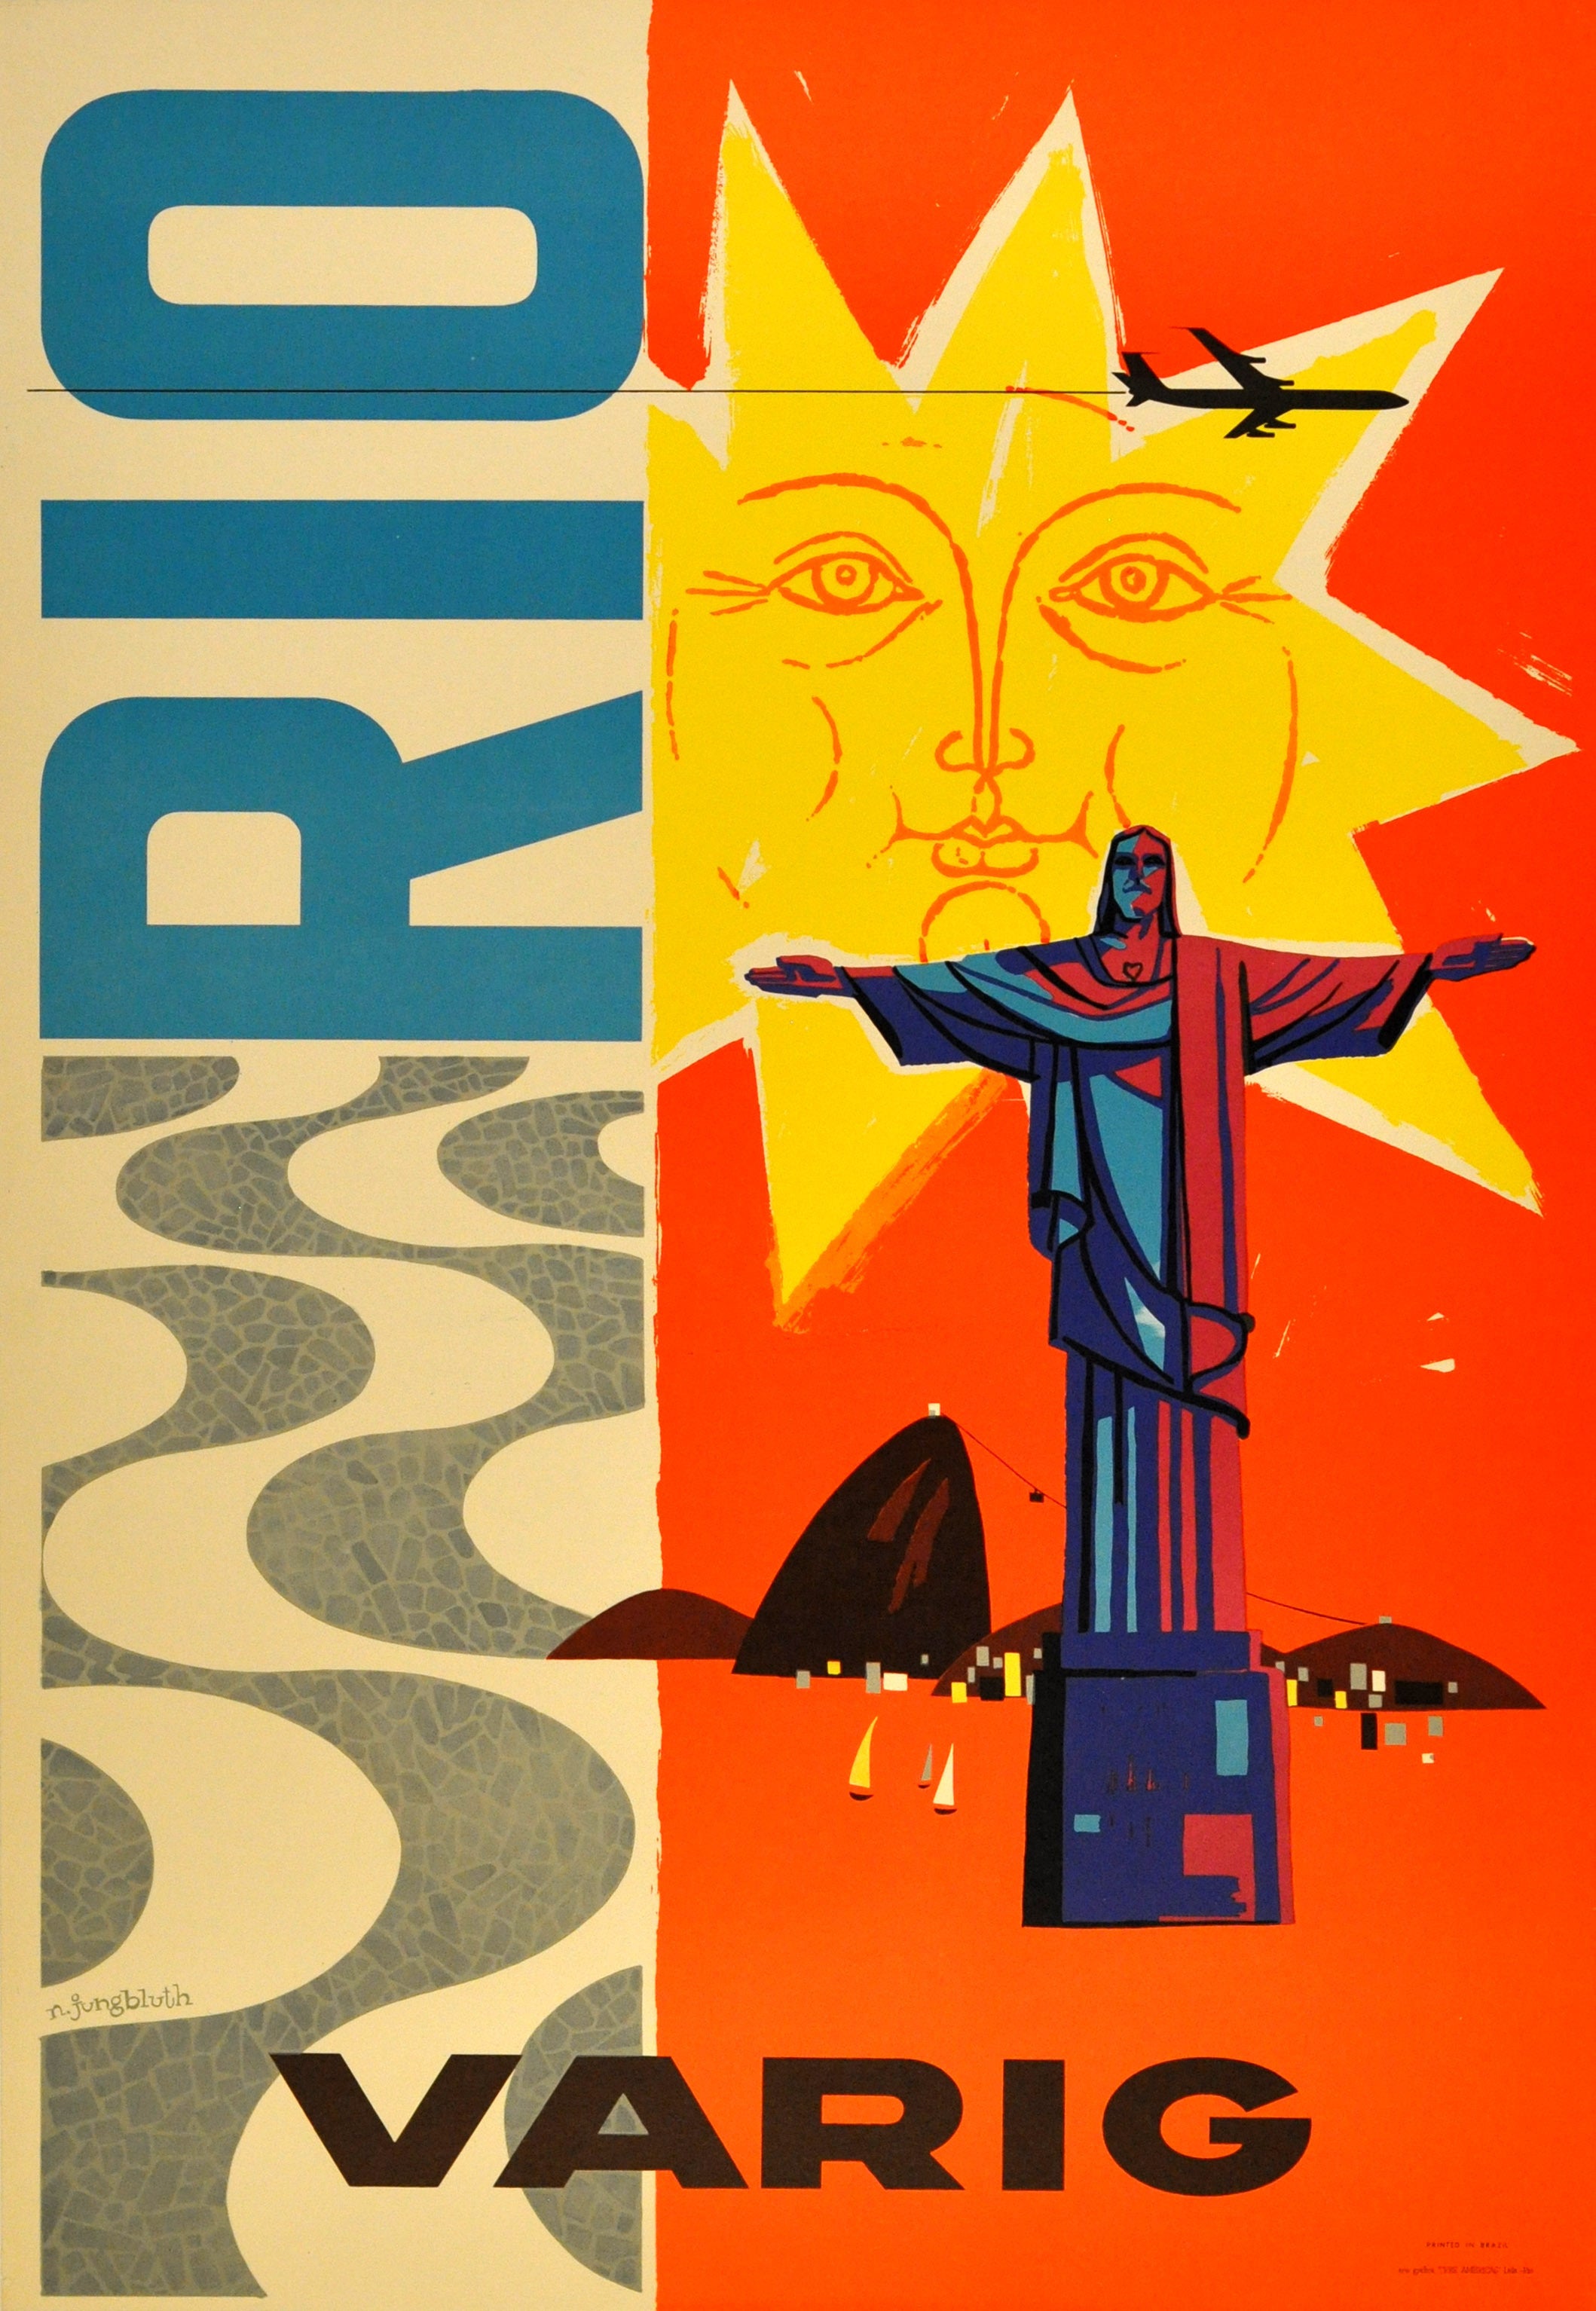 Original Vintage Travel Advertising Poster For Rio De Janeiro By Varig Airlines